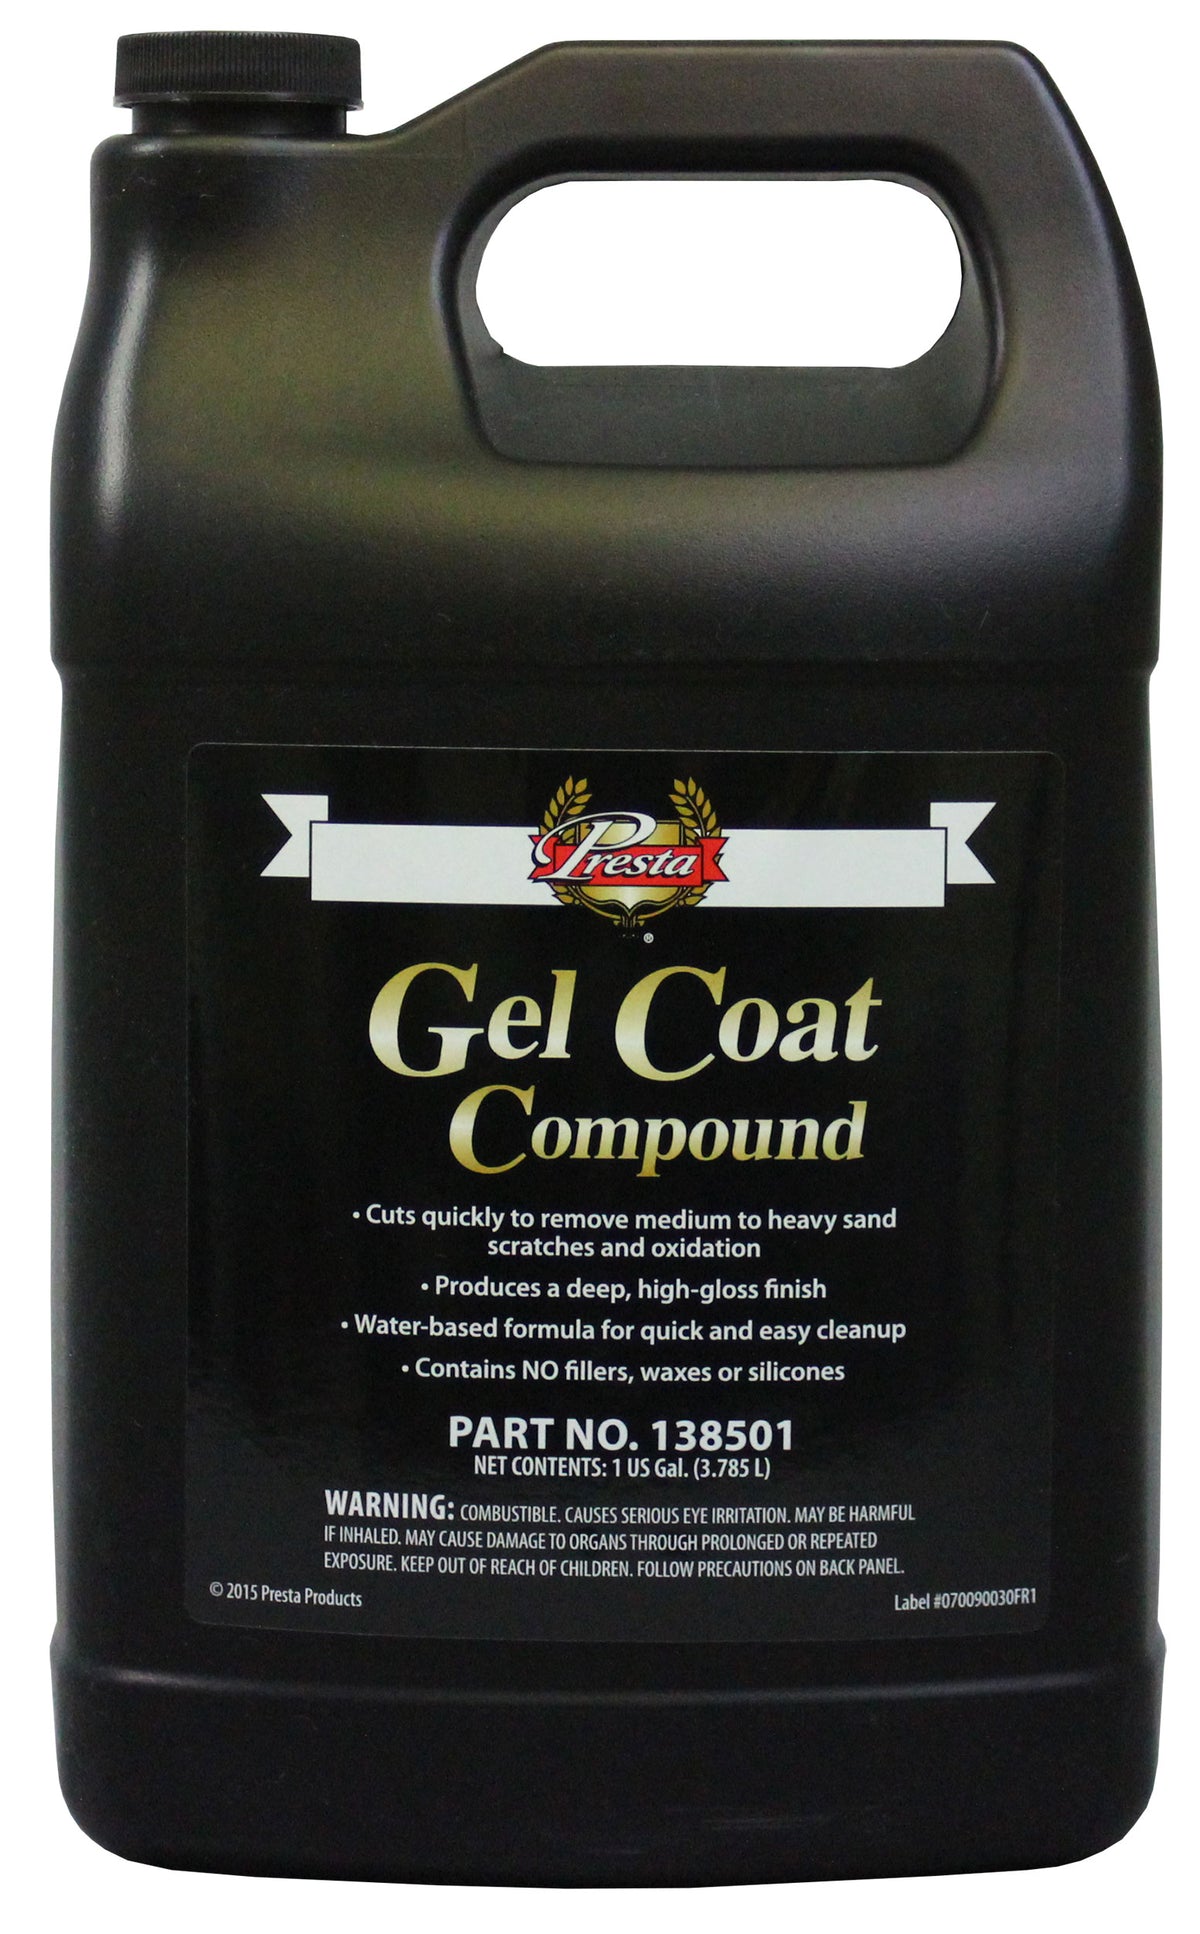 Presta 138501 Gel Coat Compound for Removing P1000 Grit, Finer Sand Scratches and Oxidation - 1 Gallon